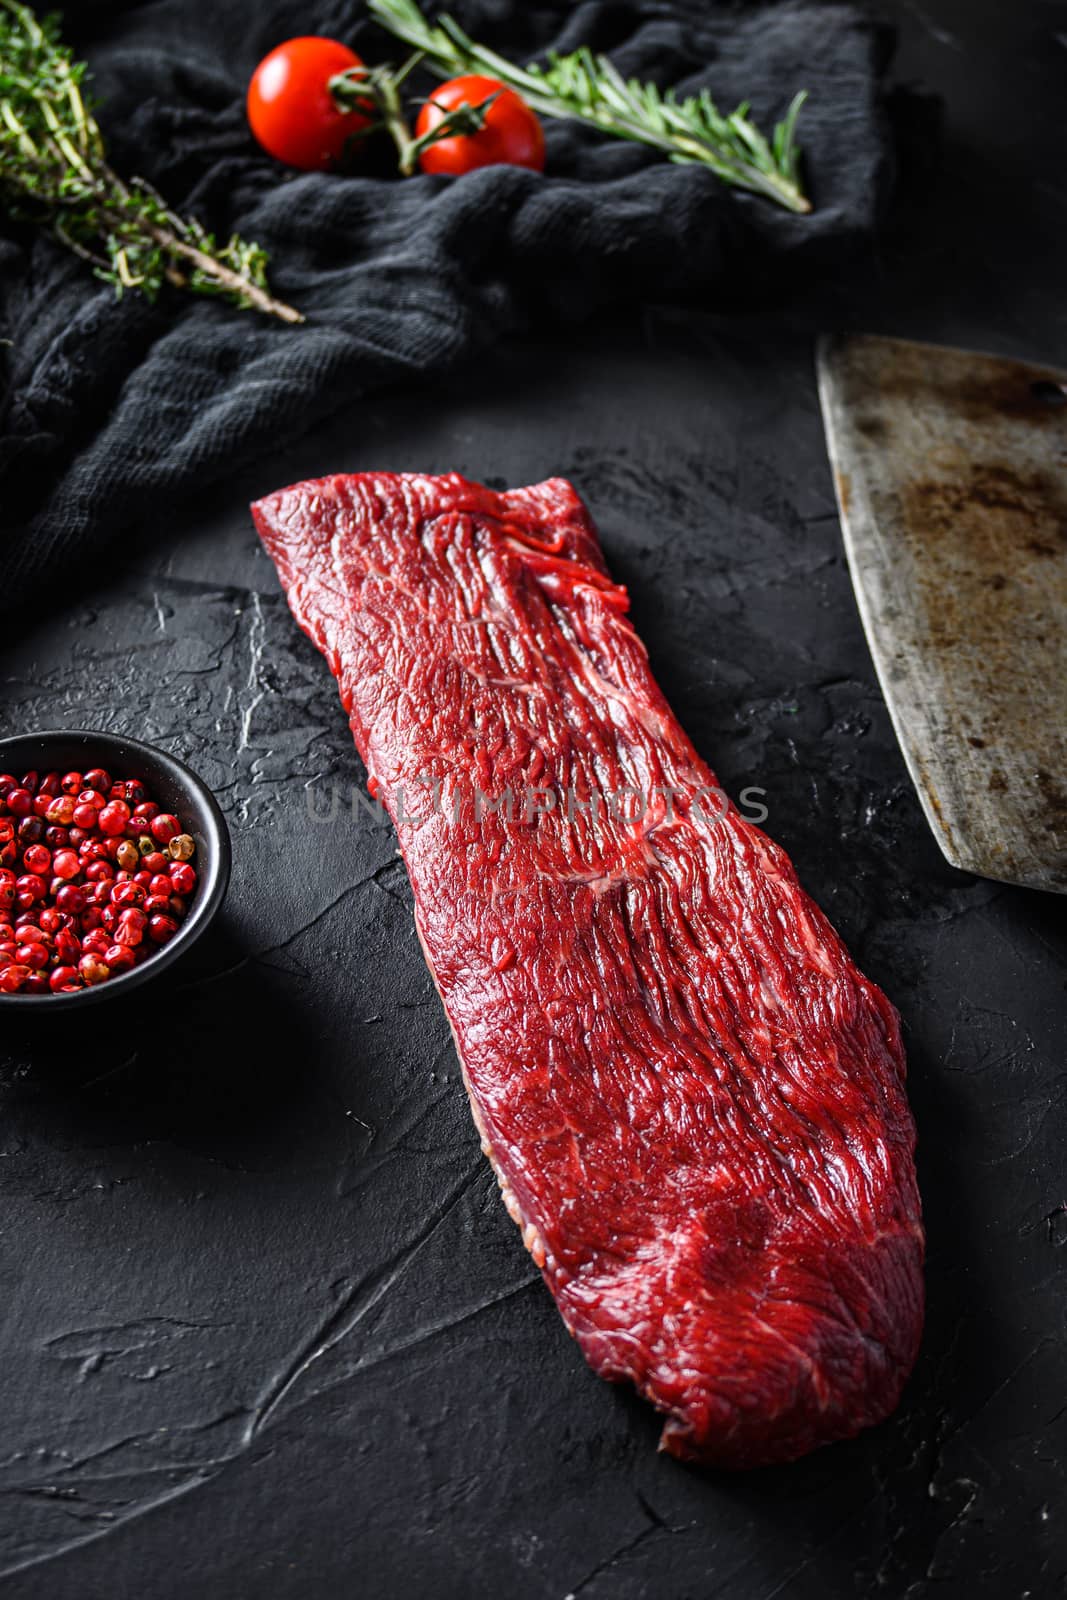 Raw triangle roast or tri tip, near butcher knife with pink pepper and rosemary. Black background. Close up side view selective focus by Ilianesolenyi